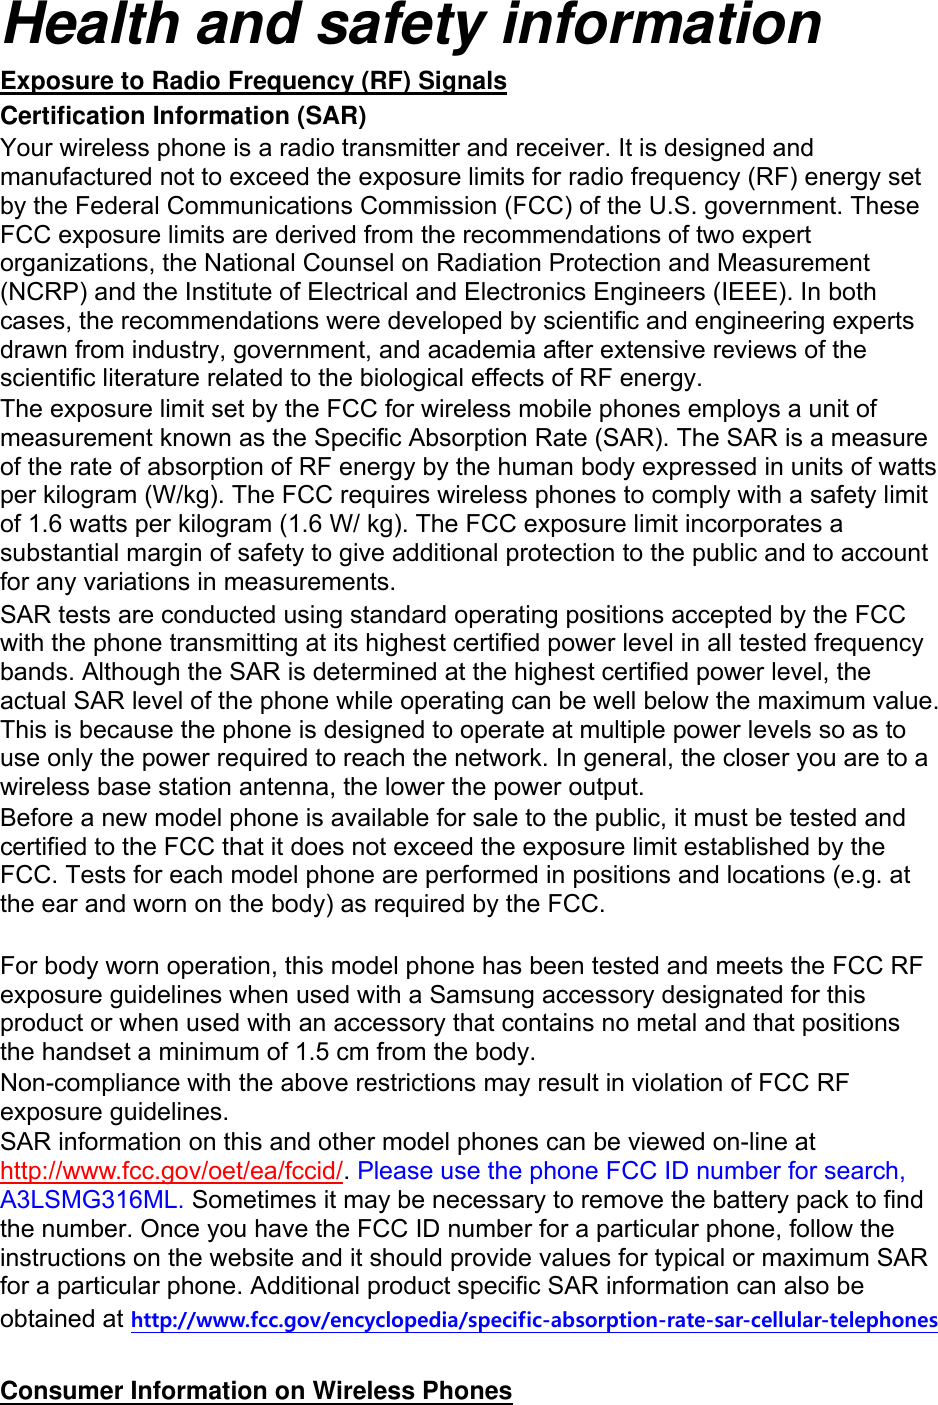 Health and safety information Exposure to Radio Frequency (RF) Signals Certification Information (SAR) Your wireless phone is a radio transmitter and receiver. It is designed and manufactured not to exceed the exposure limits for radio frequency (RF) energy set by the Federal Communications Commission (FCC) of the U.S. government. These FCC exposure limits are derived from the recommendations of two expert organizations, the National Counsel on Radiation Protection and Measurement (NCRP) and the Institute of Electrical and Electronics Engineers (IEEE). In both cases, the recommendations were developed by scientific and engineering experts drawn from industry, government, and academia after extensive reviews of the scientific literature related to the biological effects of RF energy. The exposure limit set by the FCC for wireless mobile phones employs a unit of measurement known as the Specific Absorption Rate (SAR). The SAR is a measure of the rate of absorption of RF energy by the human body expressed in units of watts per kilogram (W/kg). The FCC requires wireless phones to comply with a safety limit of 1.6 watts per kilogram (1.6 W/ kg). The FCC exposure limit incorporates a substantial margin of safety to give additional protection to the public and to account for any variations in measurements. SAR tests are conducted using standard operating positions accepted by the FCC with the phone transmitting at its highest certified power level in all tested frequency bands. Although the SAR is determined at the highest certified power level, the actual SAR level of the phone while operating can be well below the maximum value. This is because the phone is designed to operate at multiple power levels so as to use only the power required to reach the network. In general, the closer you are to a wireless base station antenna, the lower the power output. Before a new model phone is available for sale to the public, it must be tested and certified to the FCC that it does not exceed the exposure limit established by the FCC. Tests for each model phone are performed in positions and locations (e.g. at the ear and worn on the body) as required by the FCC.      For body worn operation, this model phone has been tested and meets the FCC RF exposure guidelines when used with a Samsung accessory designated for this product or when used with an accessory that contains no metal and that positions the handset a minimum of 1.5 cm from the body.   Non-compliance with the above restrictions may result in violation of FCC RF exposure guidelines. SAR information on this and other model phones can be viewed on-line at http://www.fcc.gov/oet/ea/fccid/. Please use the phone FCC ID number for search, A3LSMG316ML. Sometimes it may be necessary to remove the battery pack to find the number. Once you have the FCC ID number for a particular phone, follow the instructions on the website and it should provide values for typical or maximum SAR for a particular phone. Additional product specific SAR information can also be obtained at http://www.fcc.gov/encyclopedia/specific-absorption-rate-sar-cellular-telephones  Consumer Information on Wireless Phones 